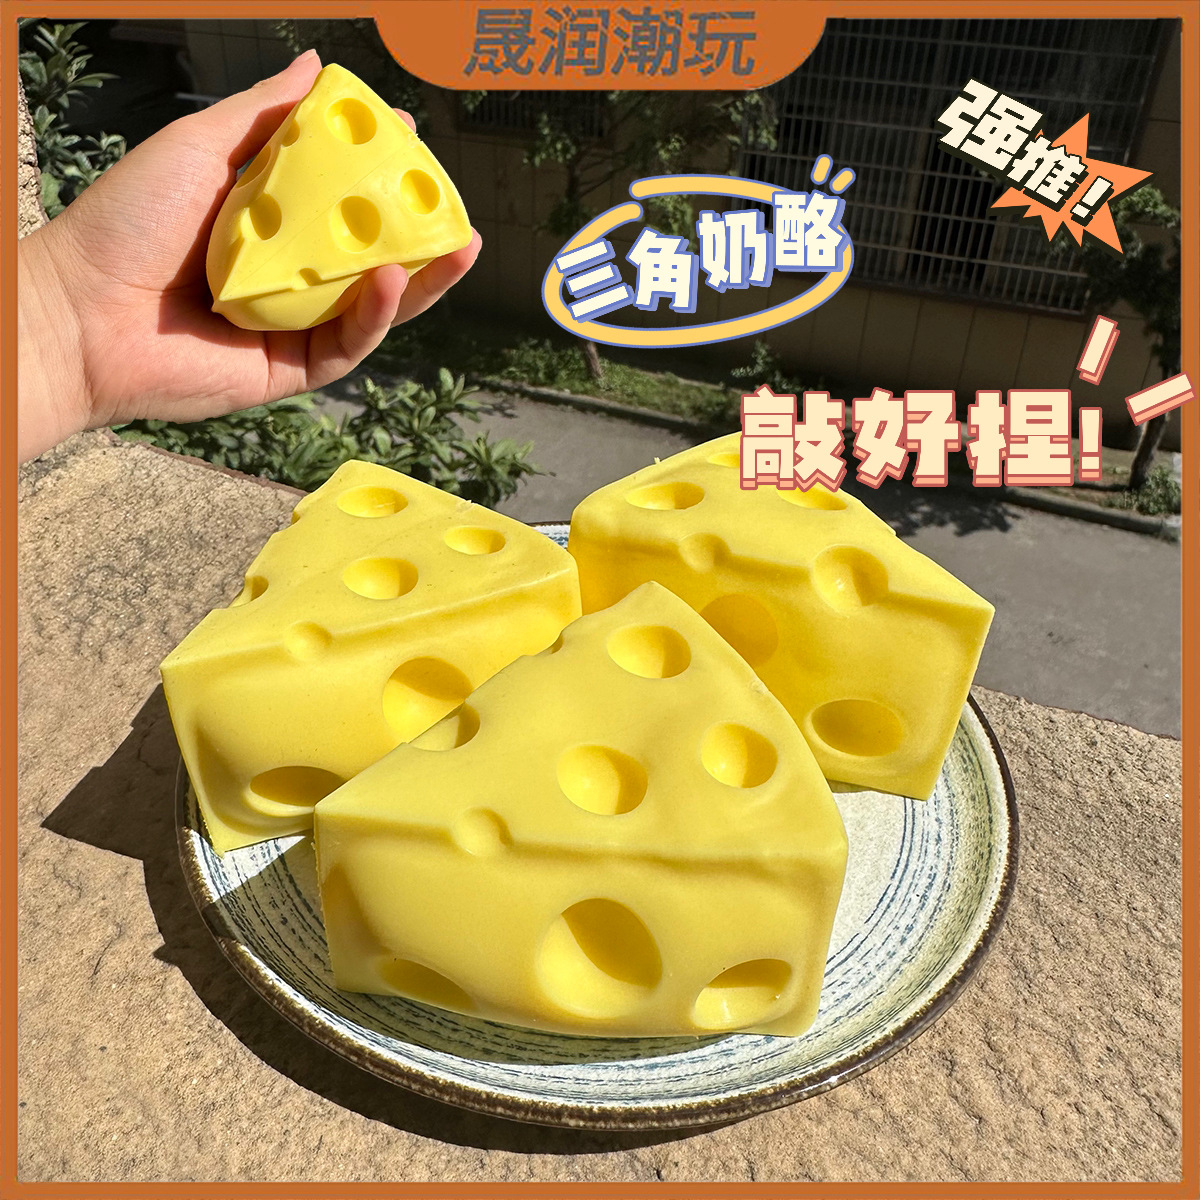 Hot Sale Creative Squeeze Cheese Squeezing Toy Vent Toy Gold Cheese Fun Decompression Artifact Factory Direct Sales